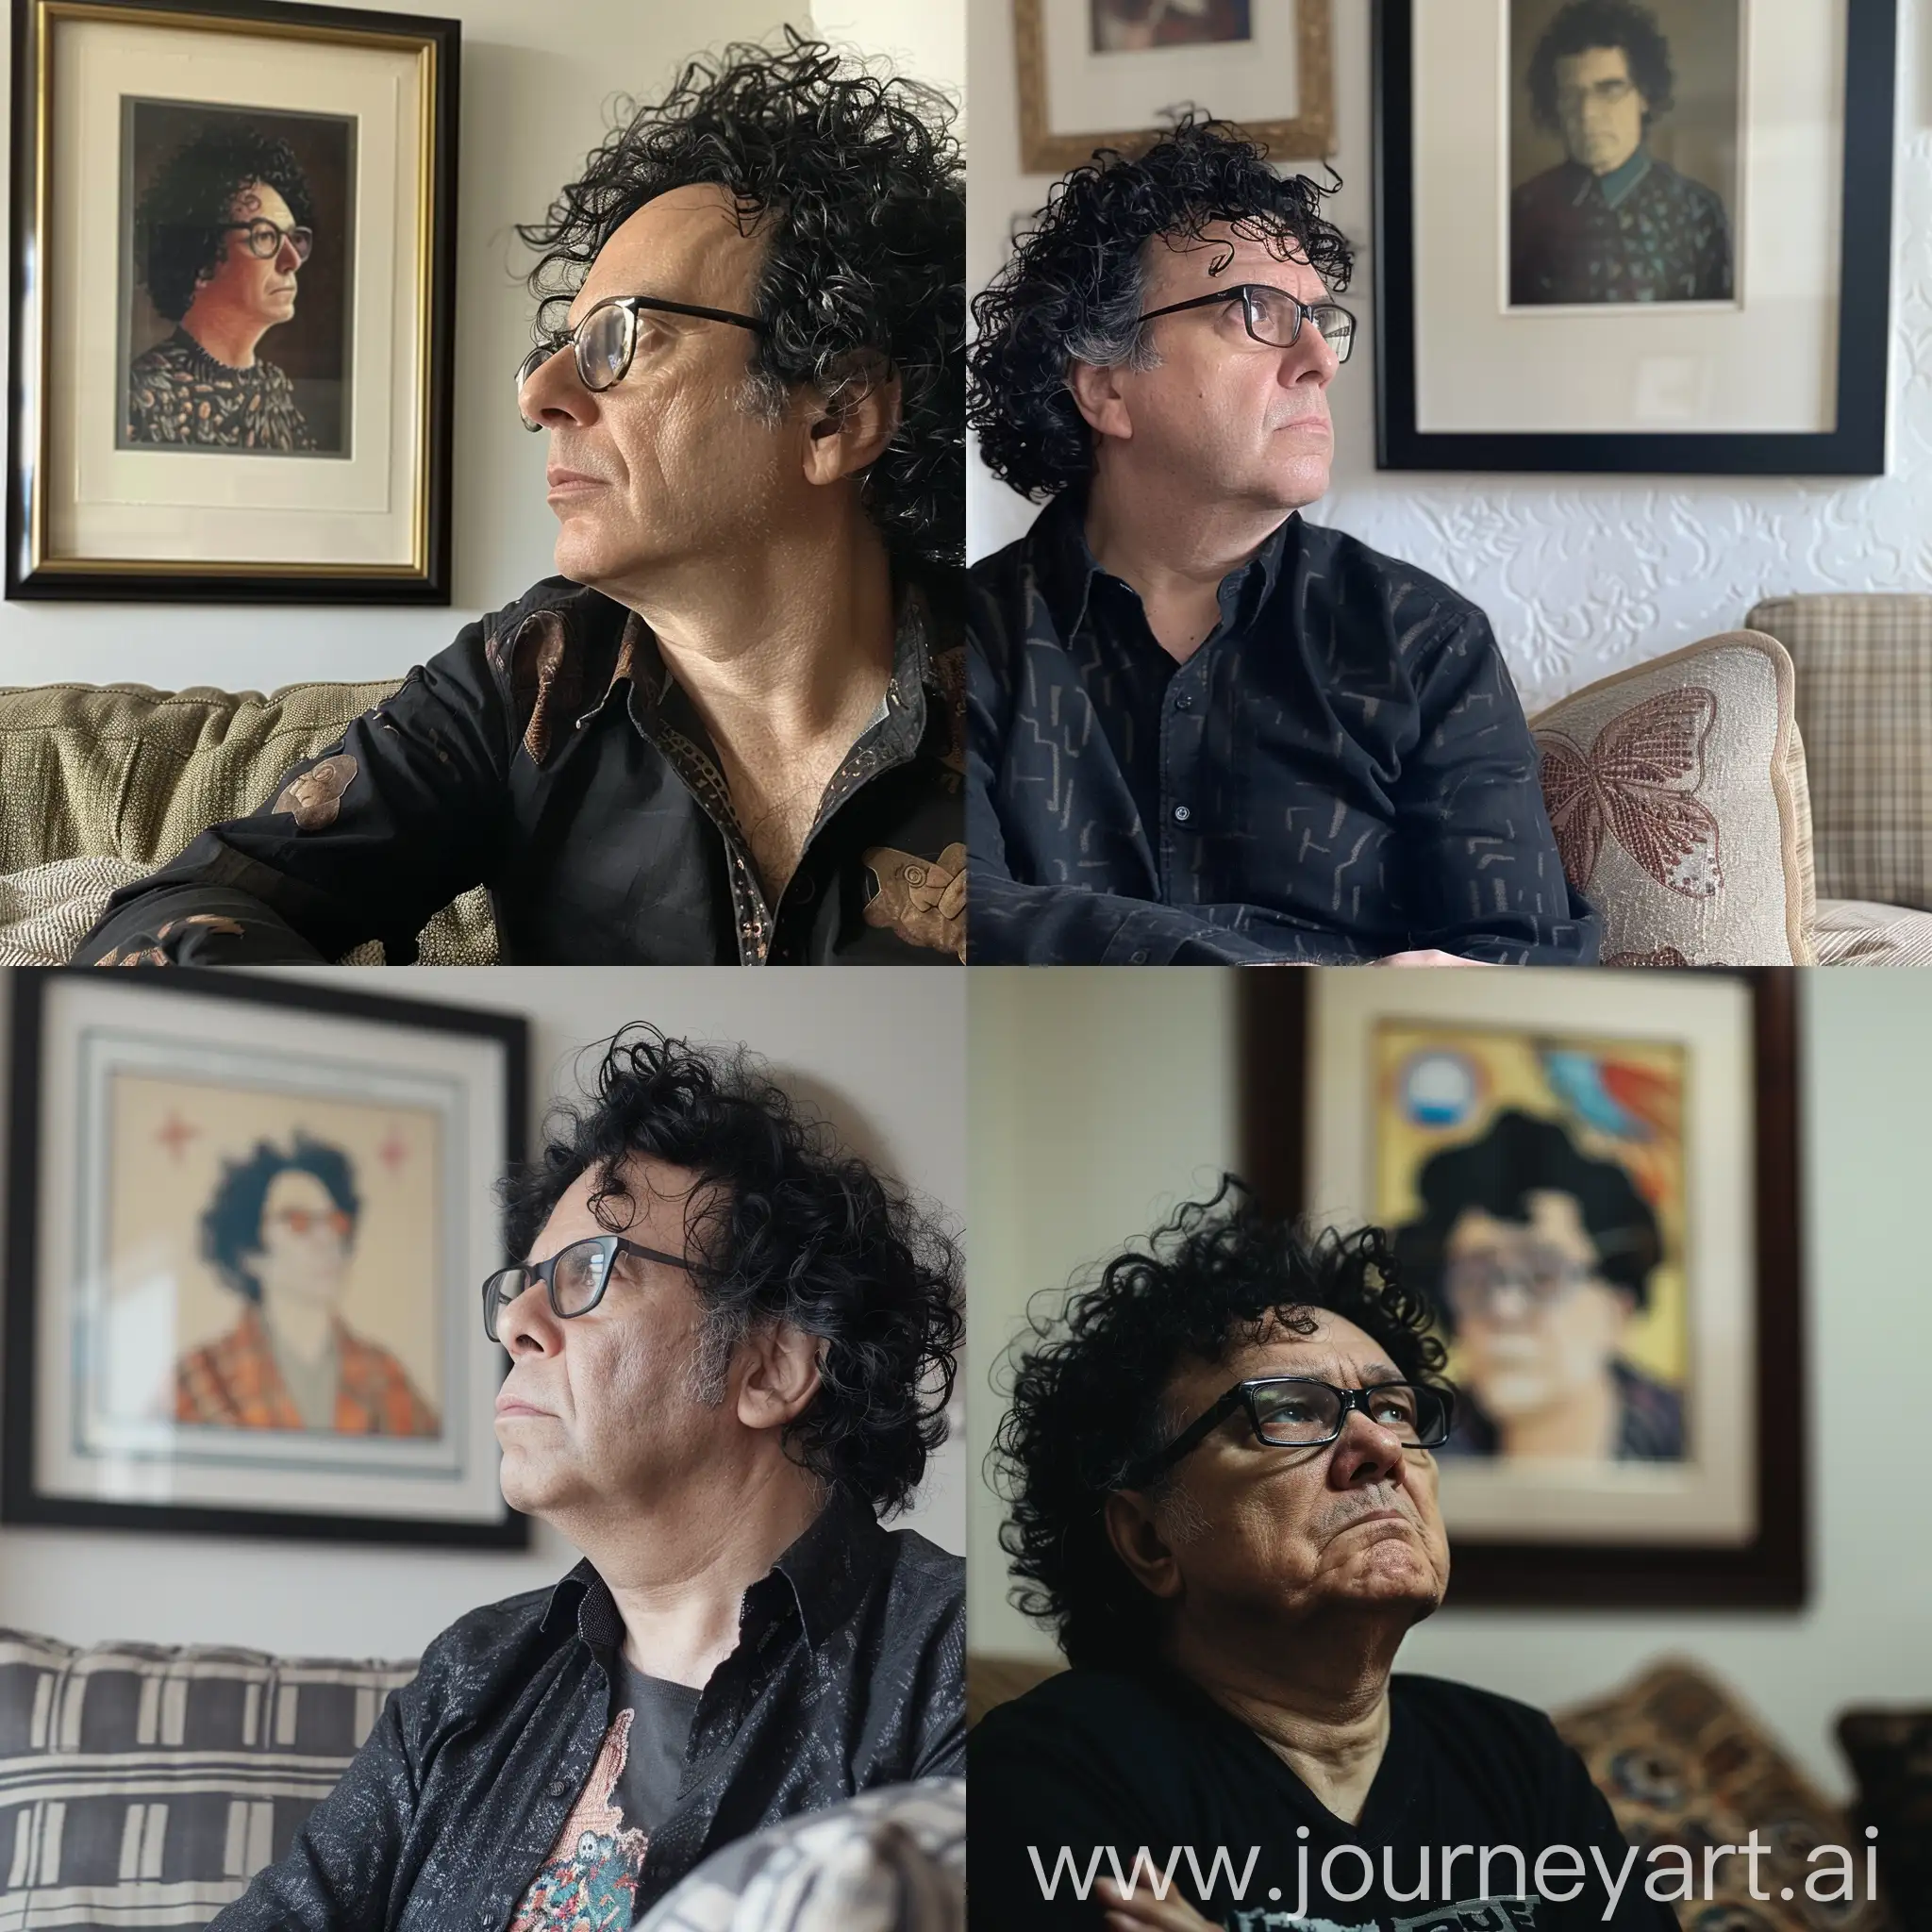 a middle aged man with black curly hair and glasses sitting in a couch watching the picture of a framed shit